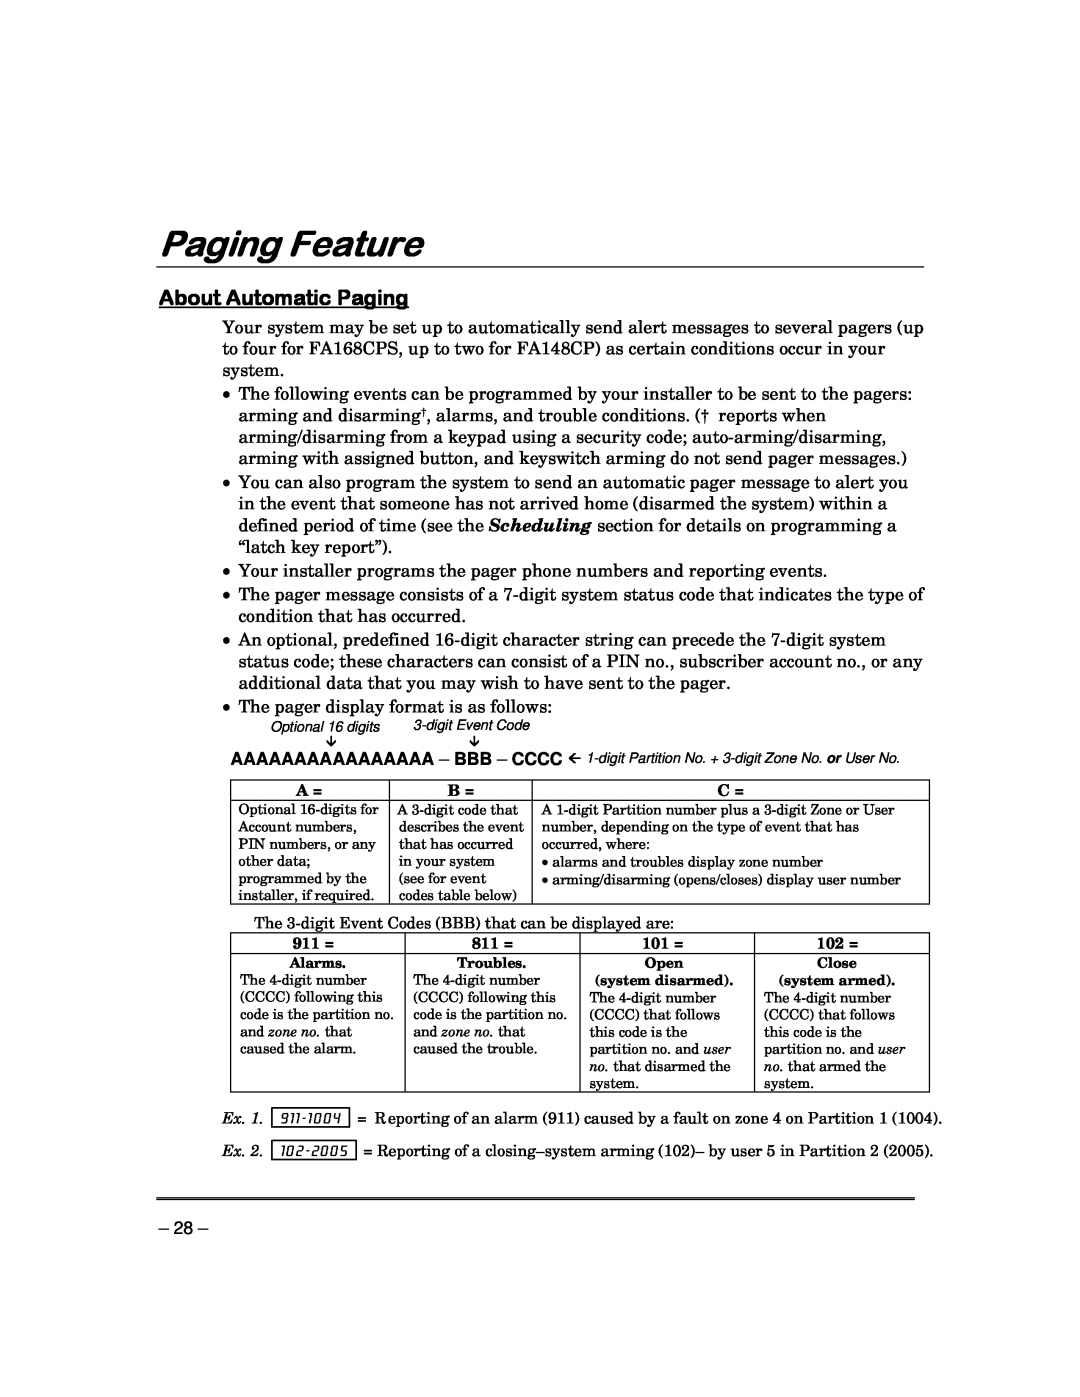 Garmin FA168CPS manual Paging Feature, About Automatic Paging 